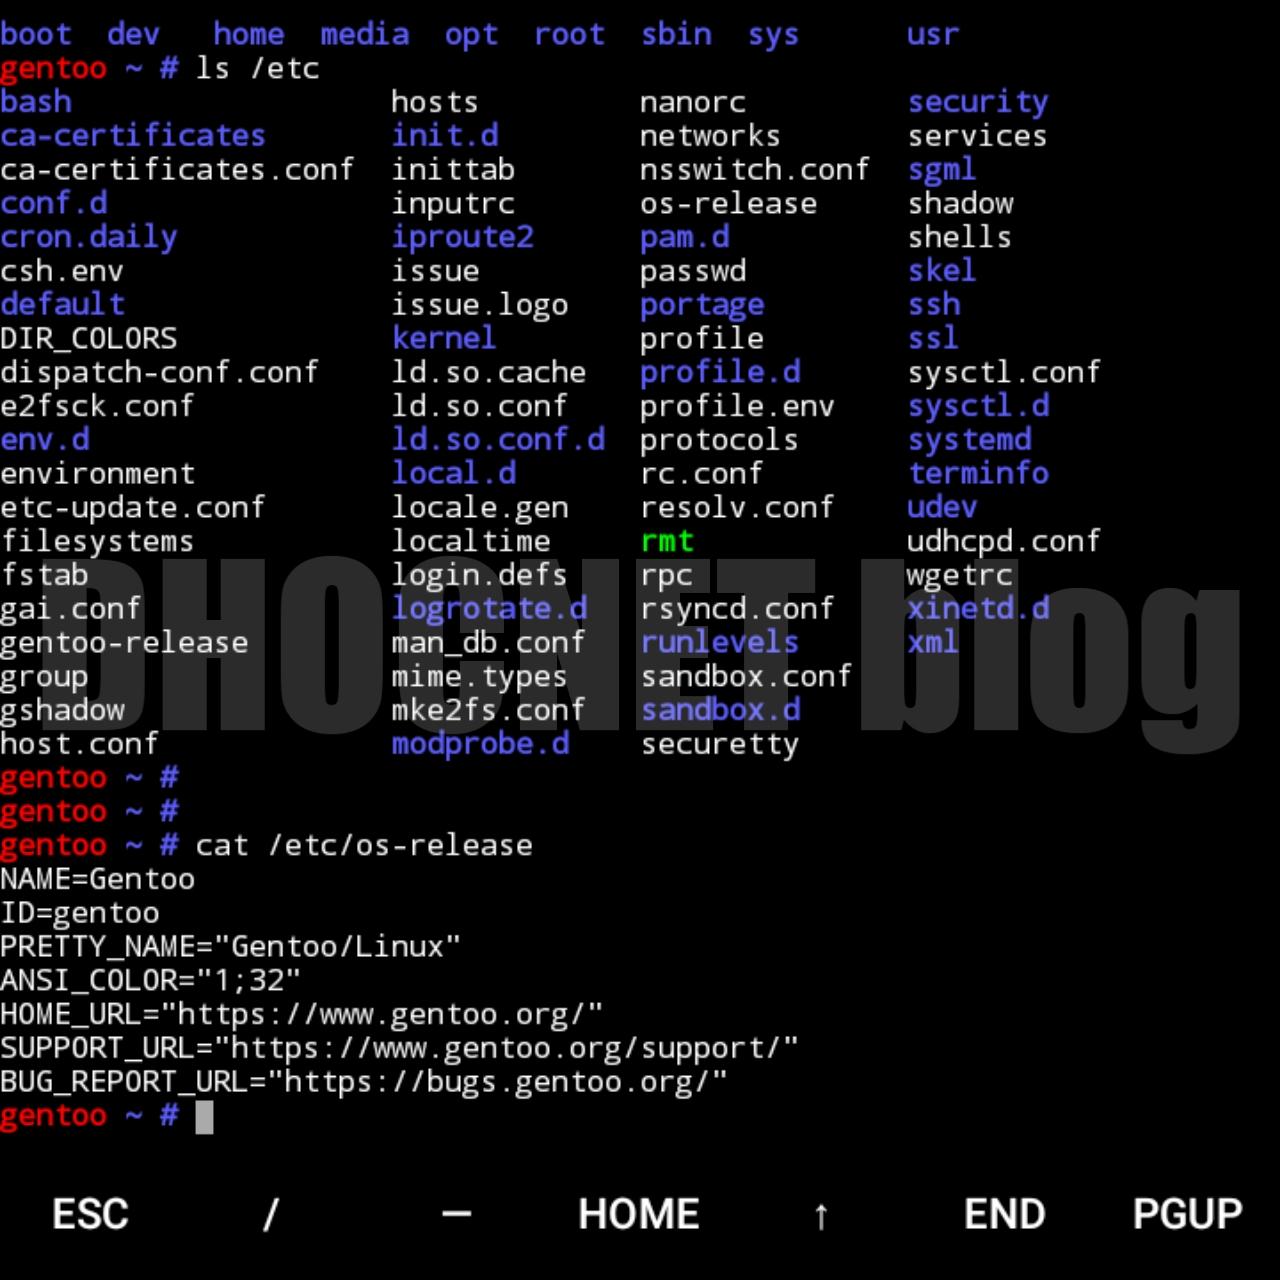 install gentoo linux di android dengan root - blog.dhocnet.work